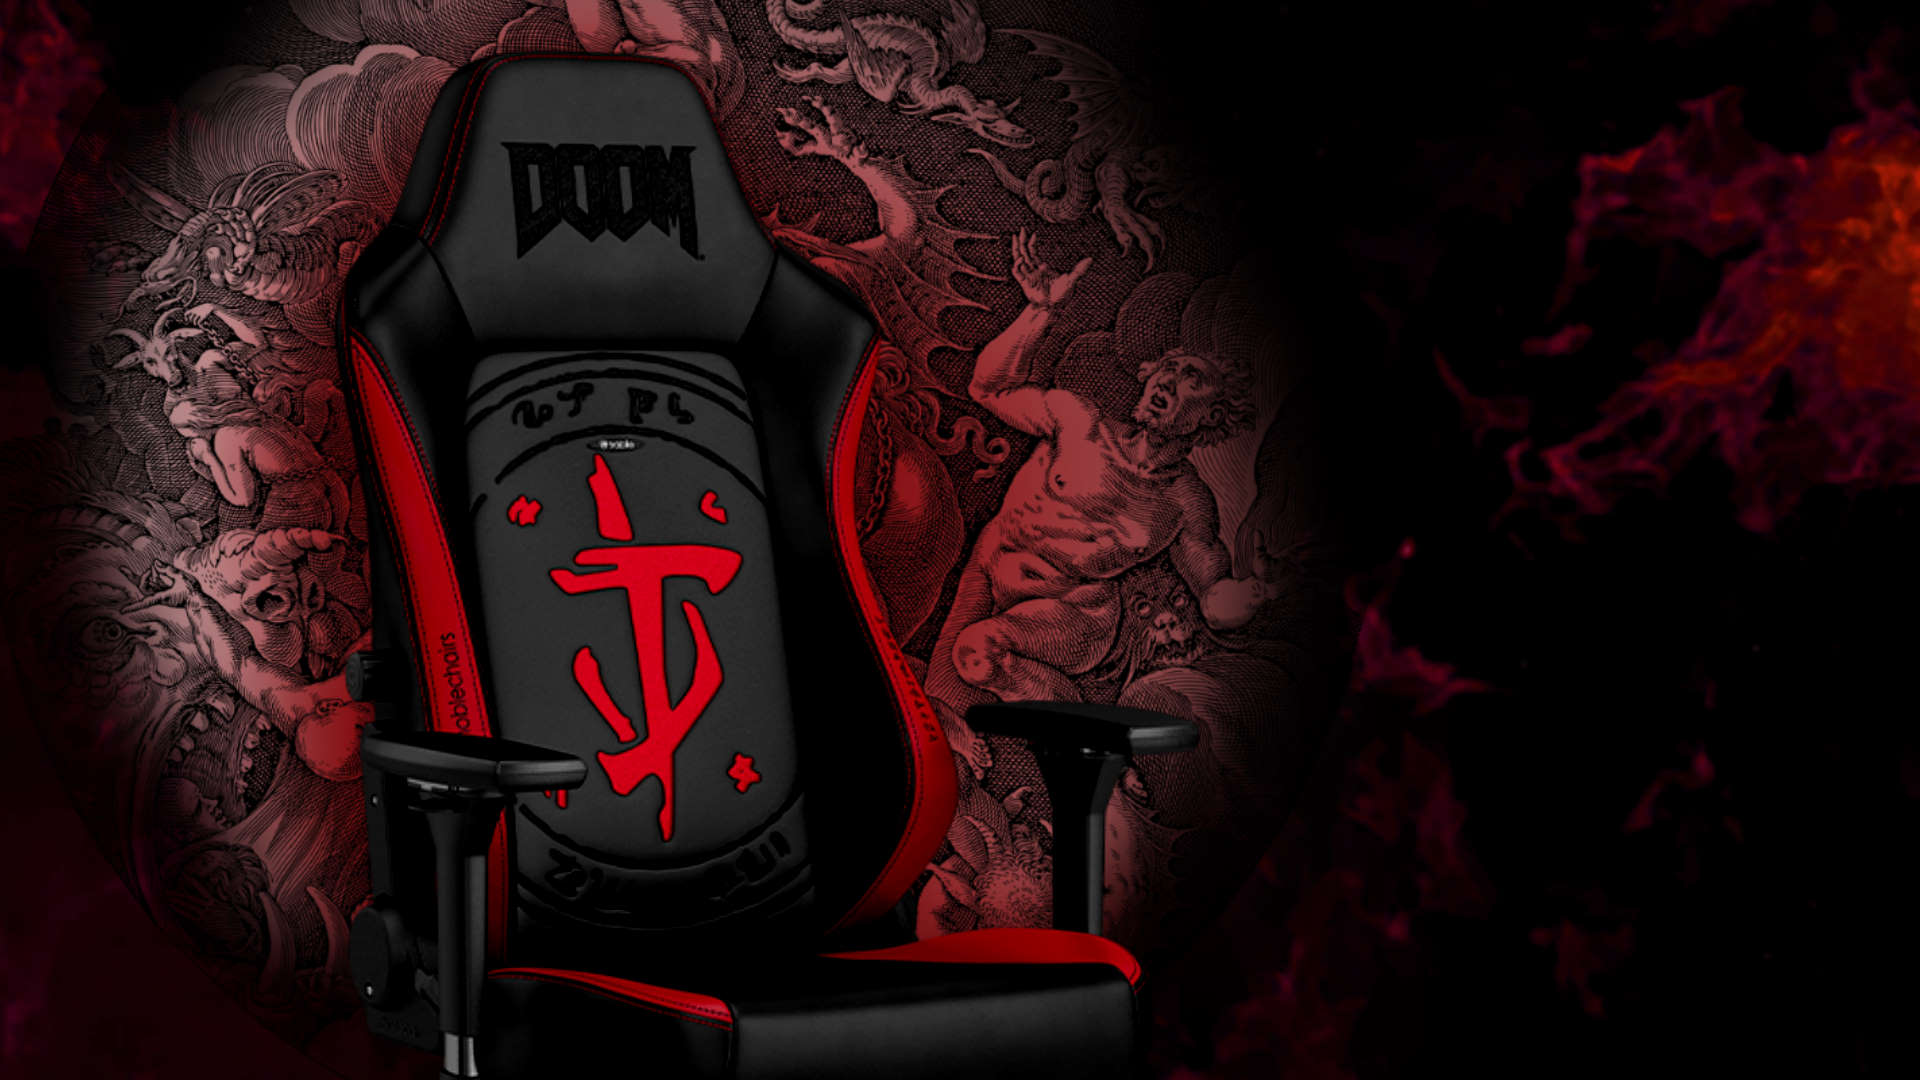  My DOOM gaming chair smells like beef. Now I want to rip and tear 